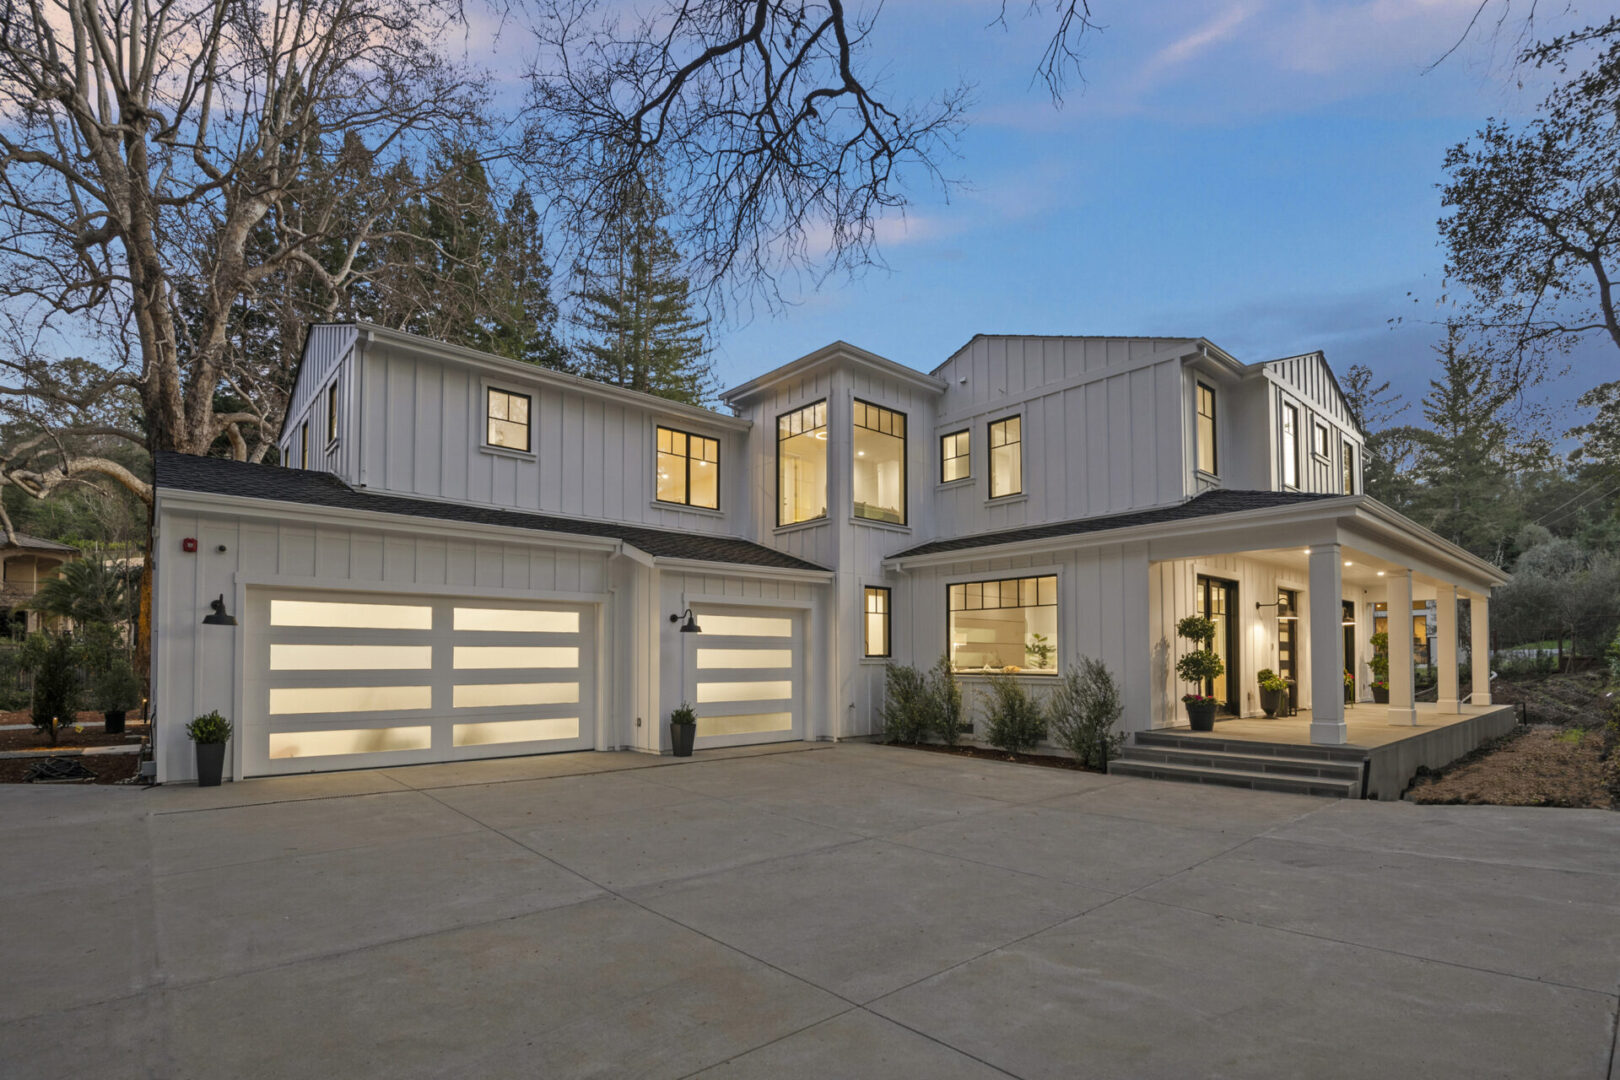 A large white house with two garage doors.